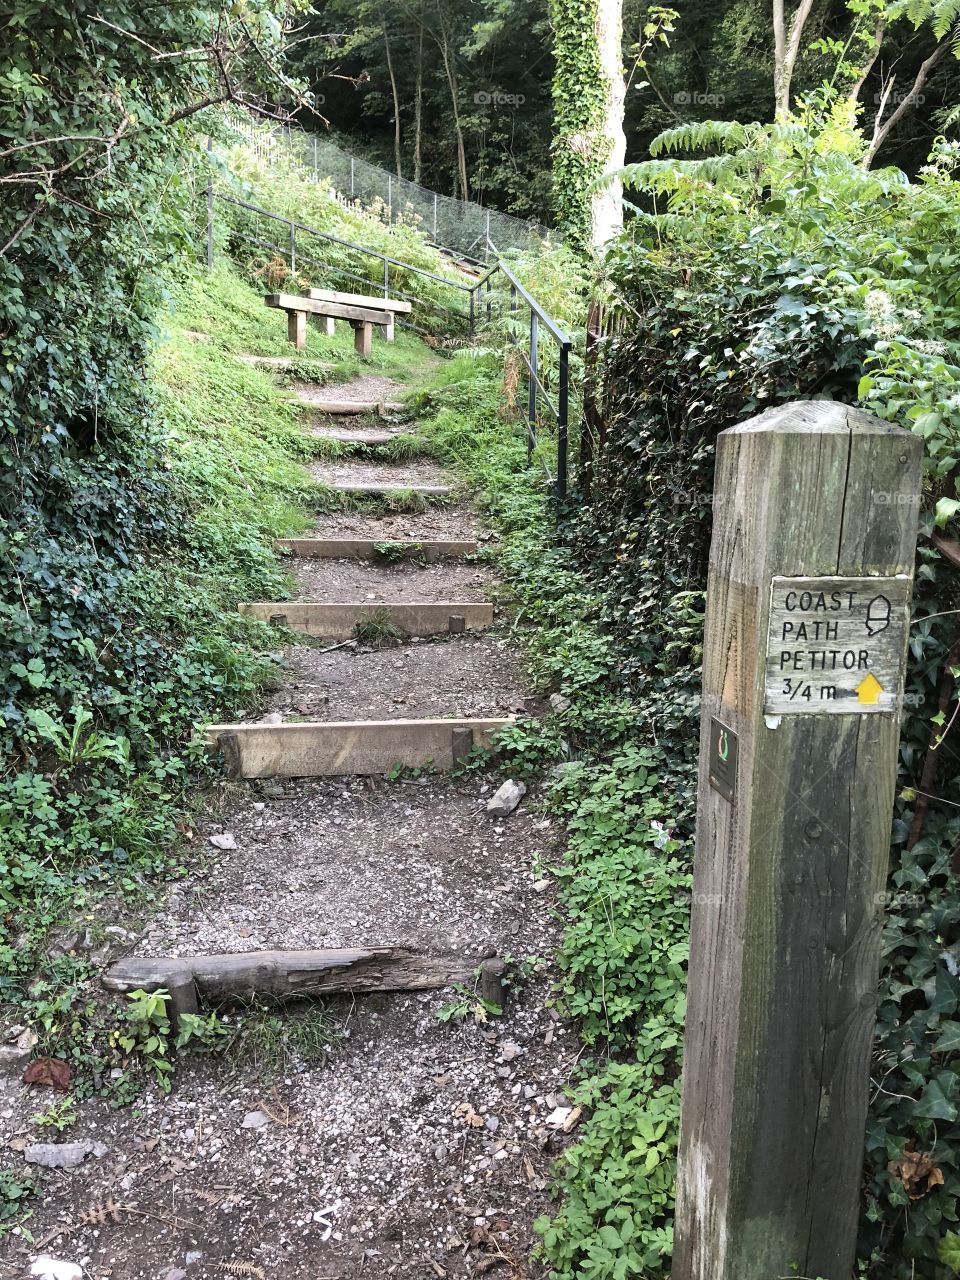 One of the many glorious walkways to be found at Babbacombe Cliffs in Torbay, UK